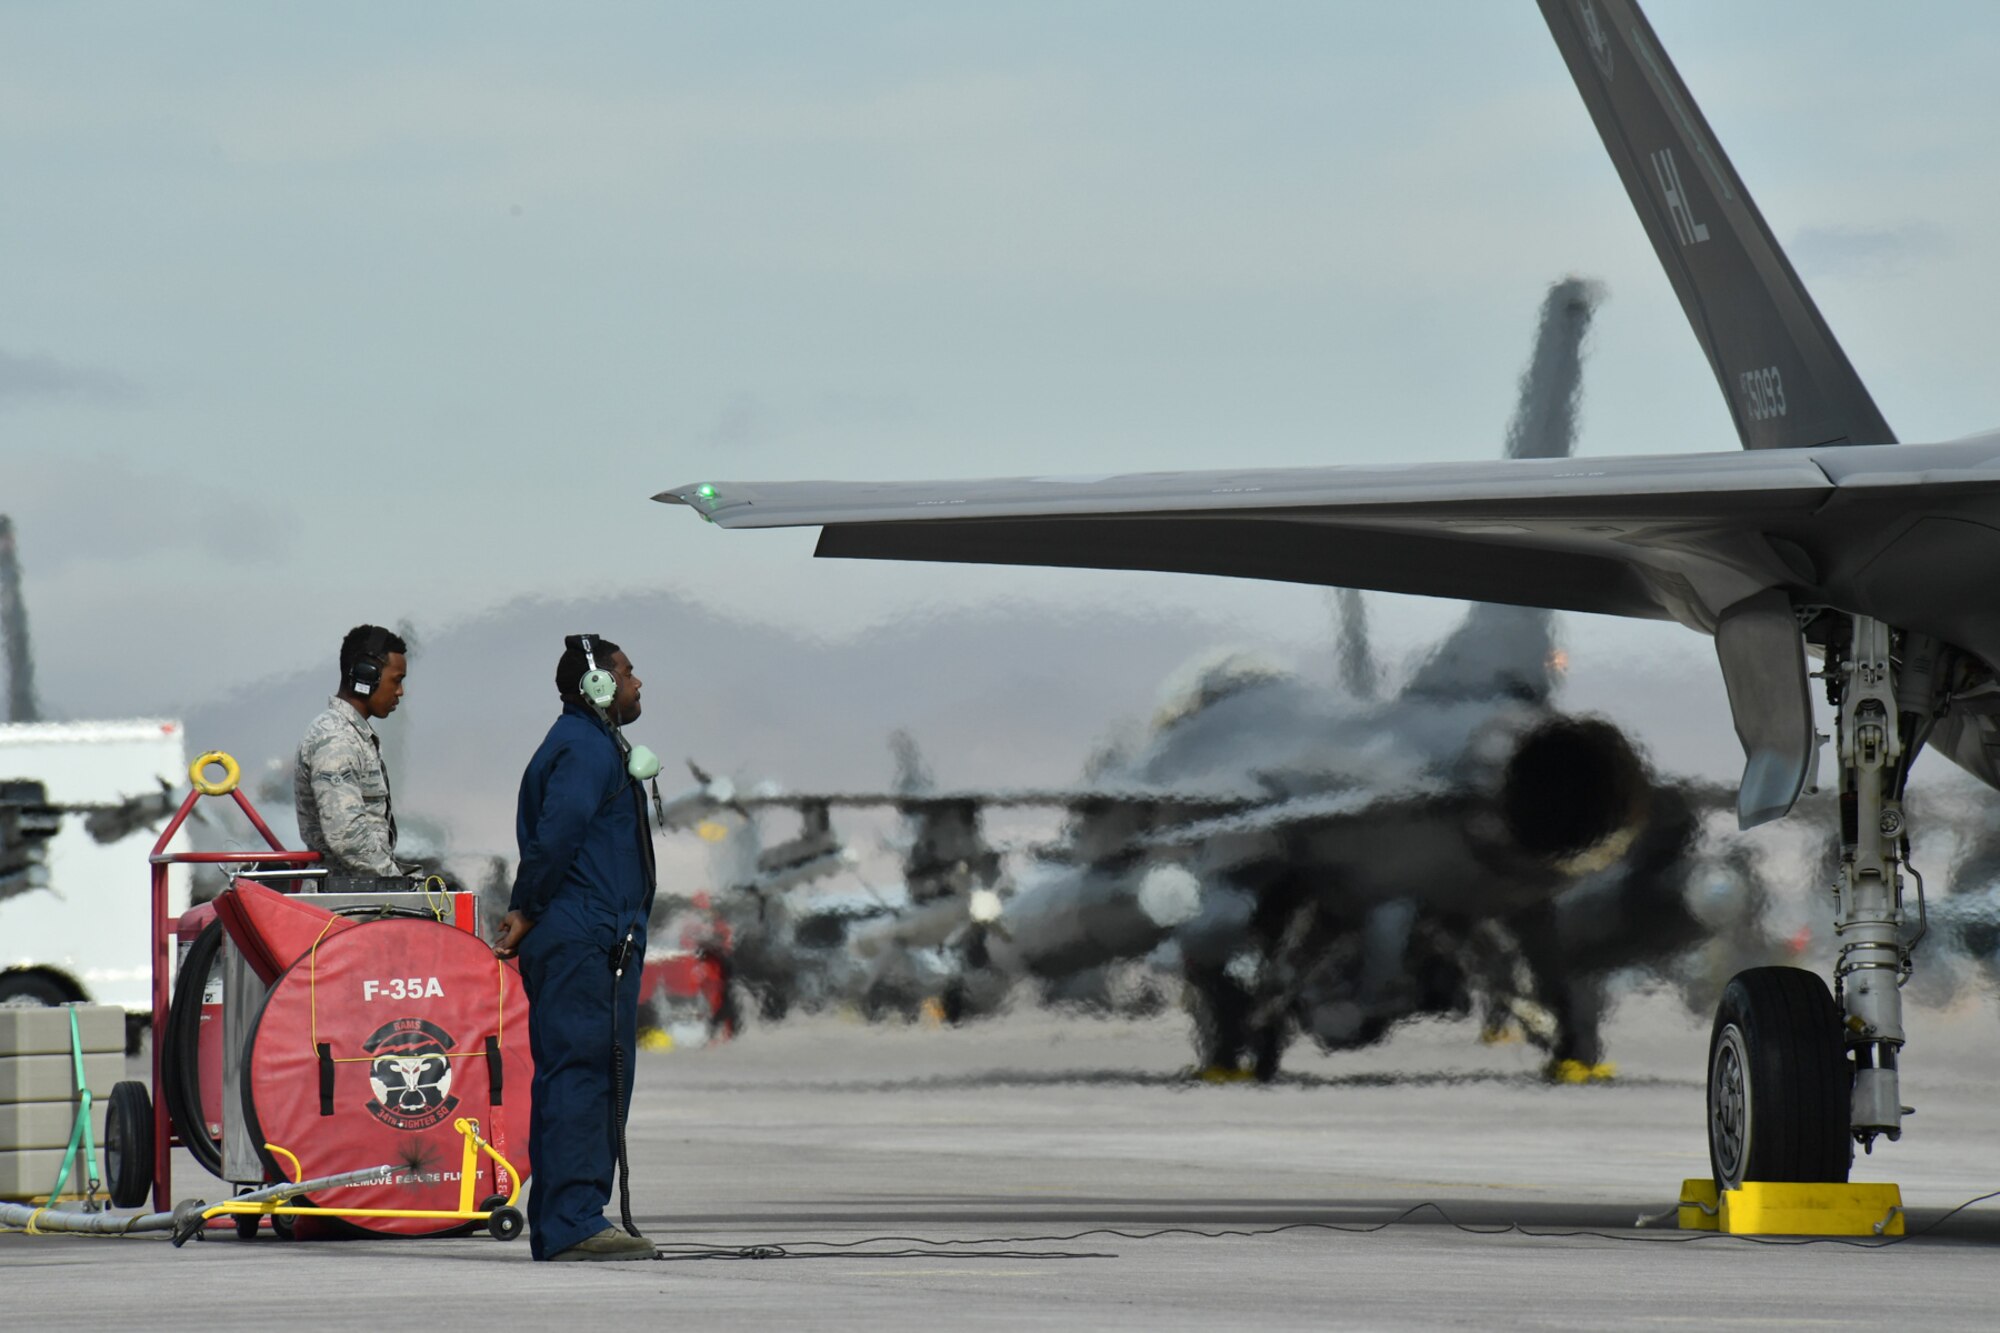 Crew chiefs from Hill Air Force Base, Utah, prepare to launch F-35A aircraft Feb. 7 at Nellis Air Force Base, Nevada, during Red Flag 17-1. (U.S. Air Force photo by R. Nial Bradshaw)